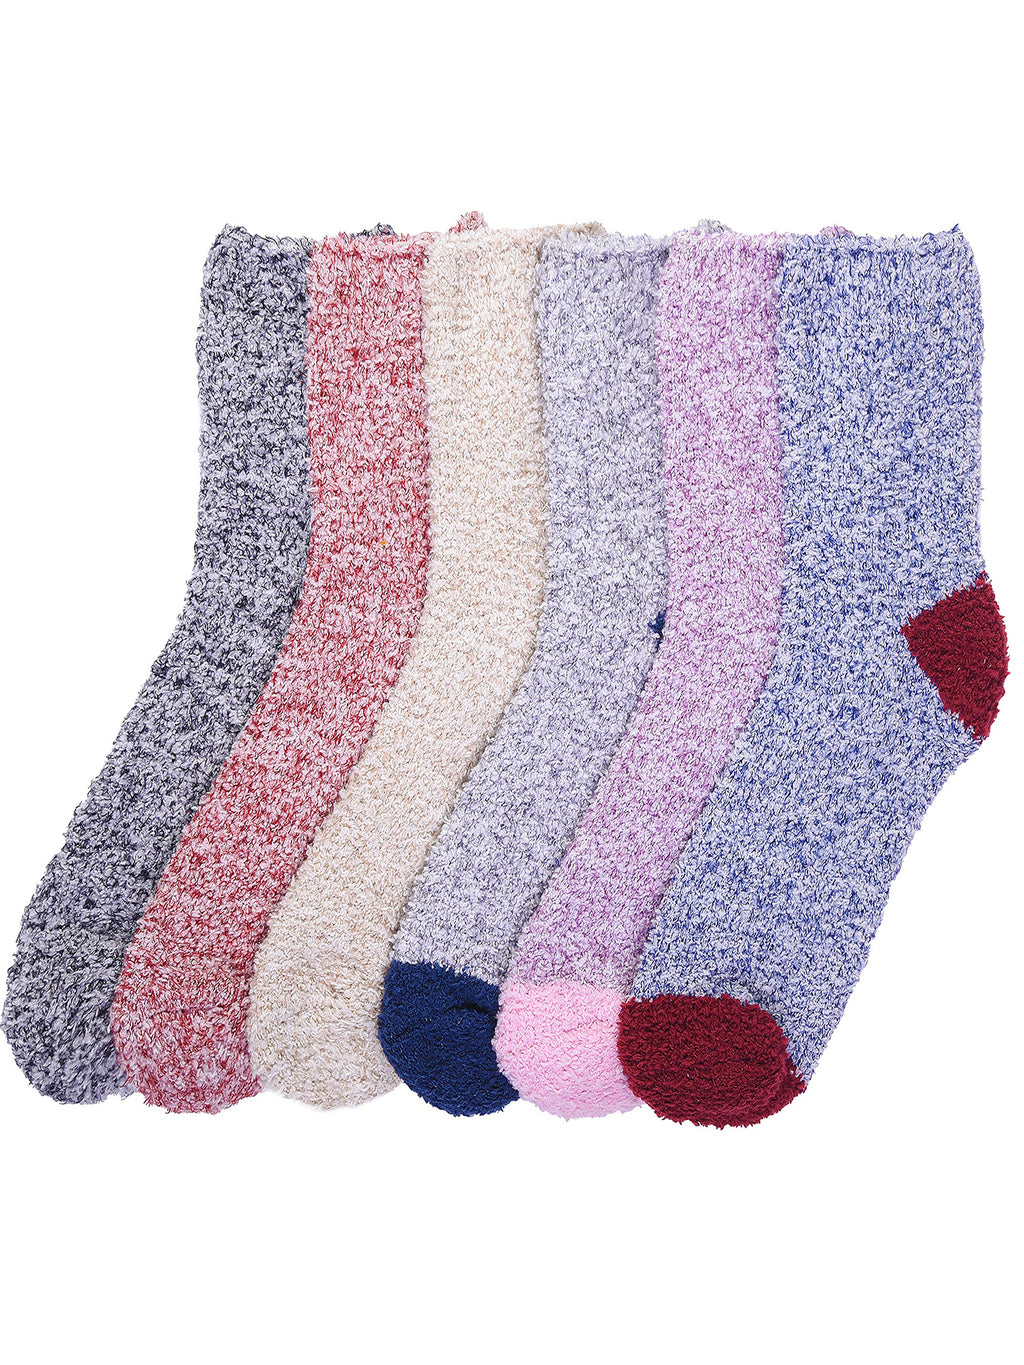 Ladies Two-Tone Colorful Marled Knit 6-Pack Fuzzy Socks